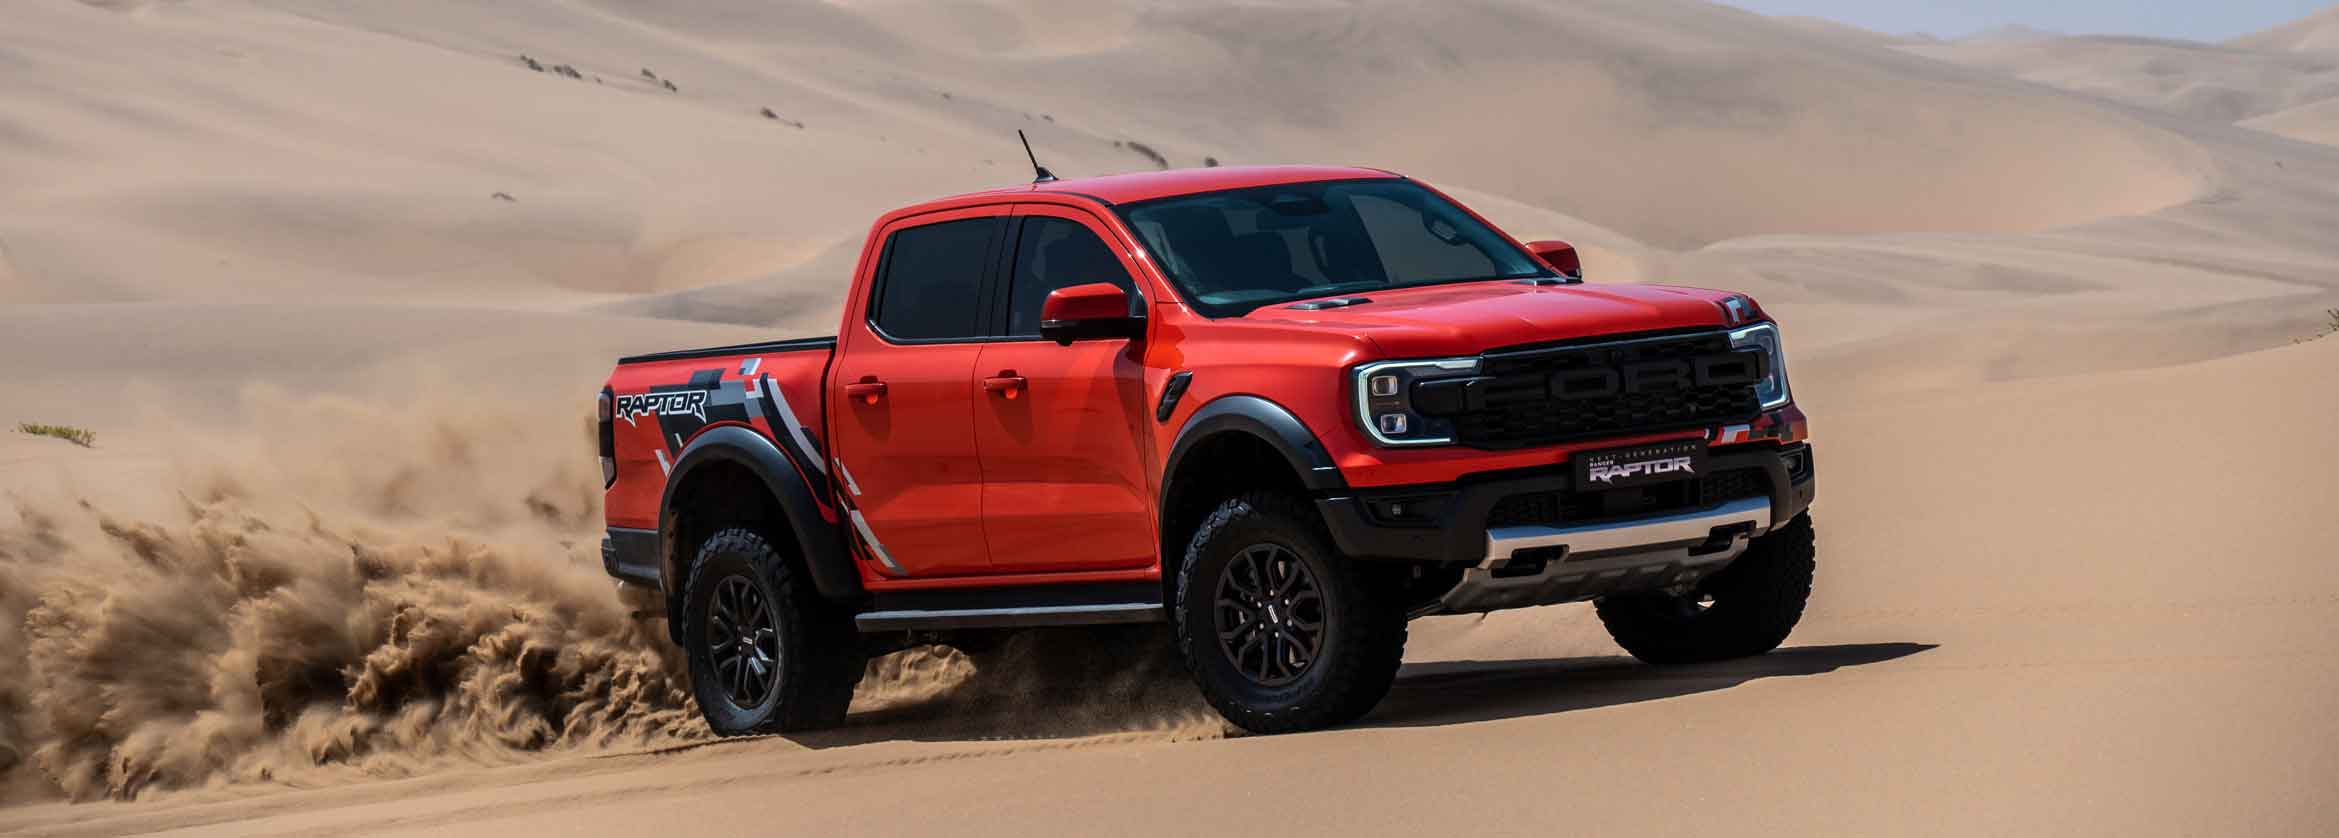 Ford launches more powerful Ranger Raptor